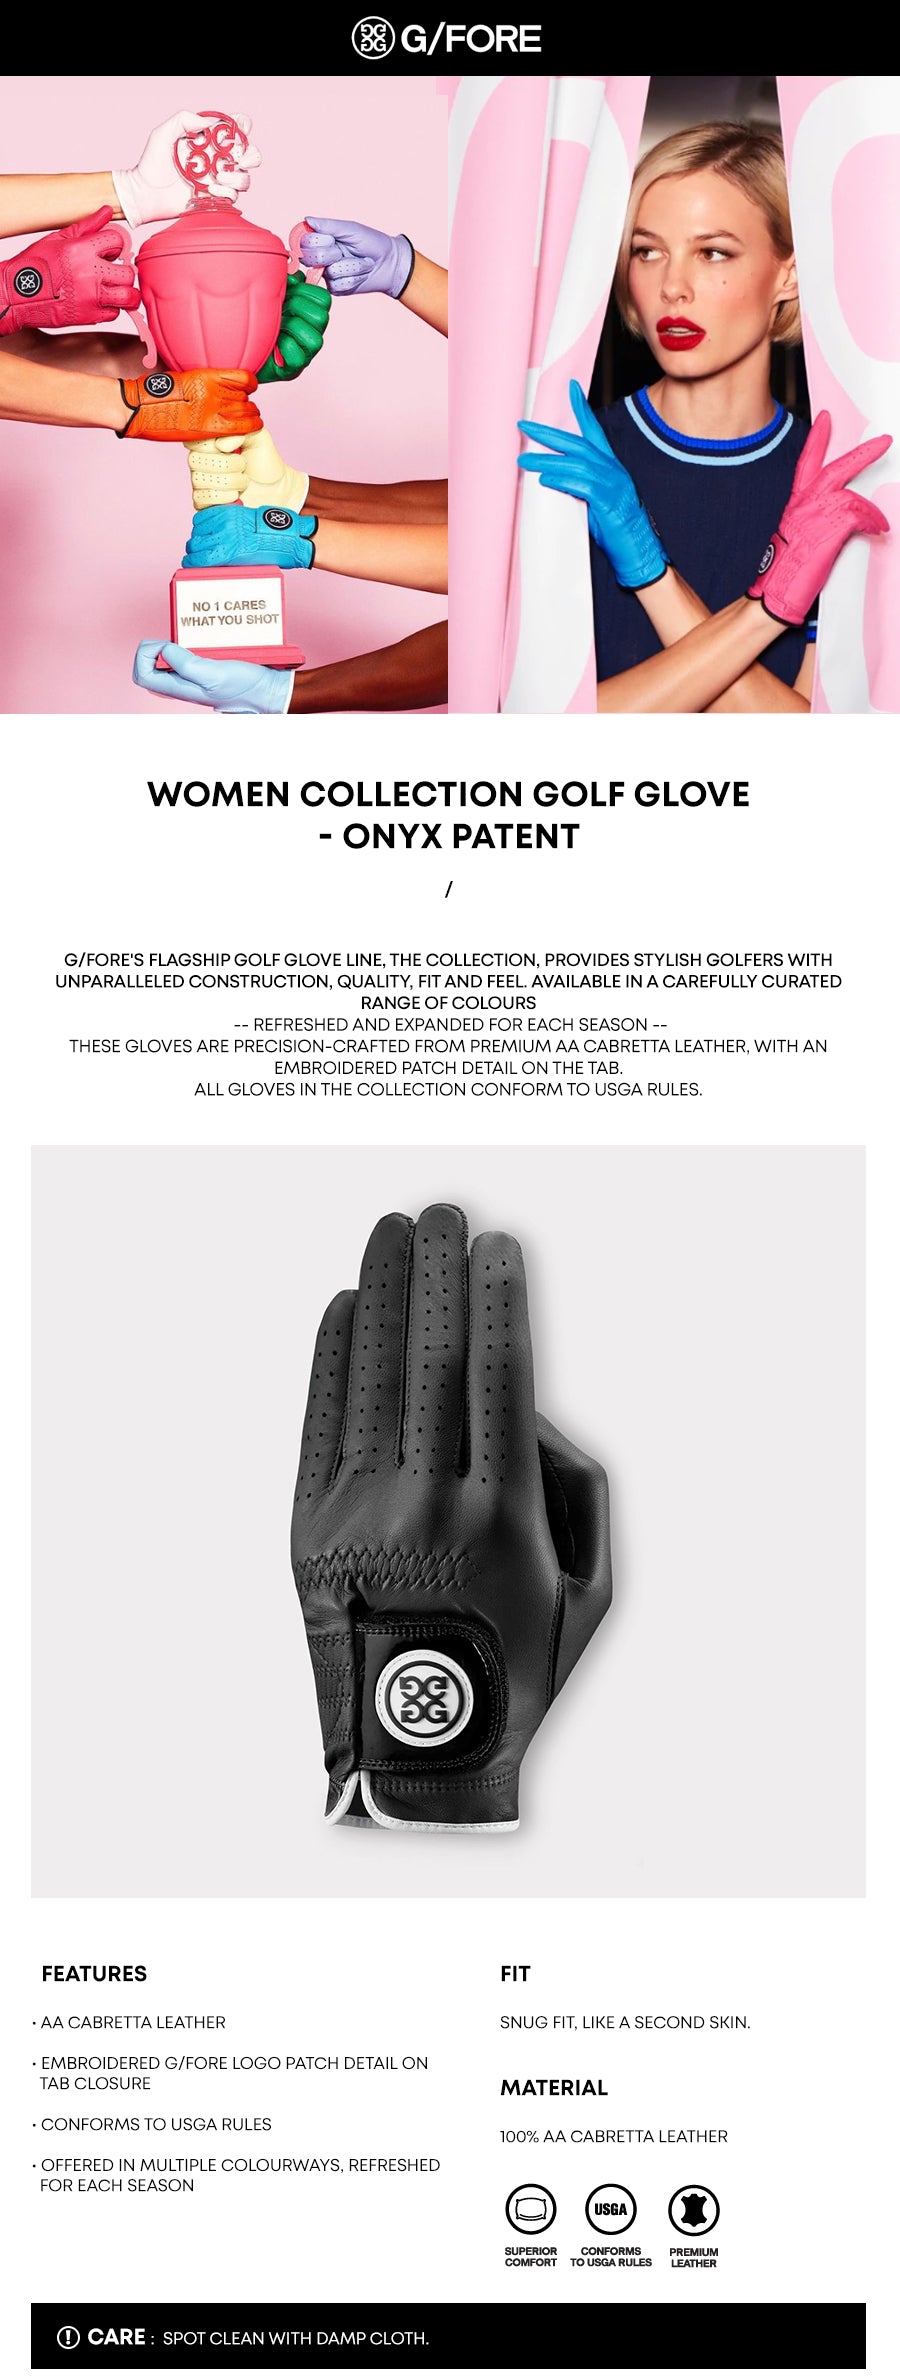 gfore-women-collection-golf-glove-onyx-patent